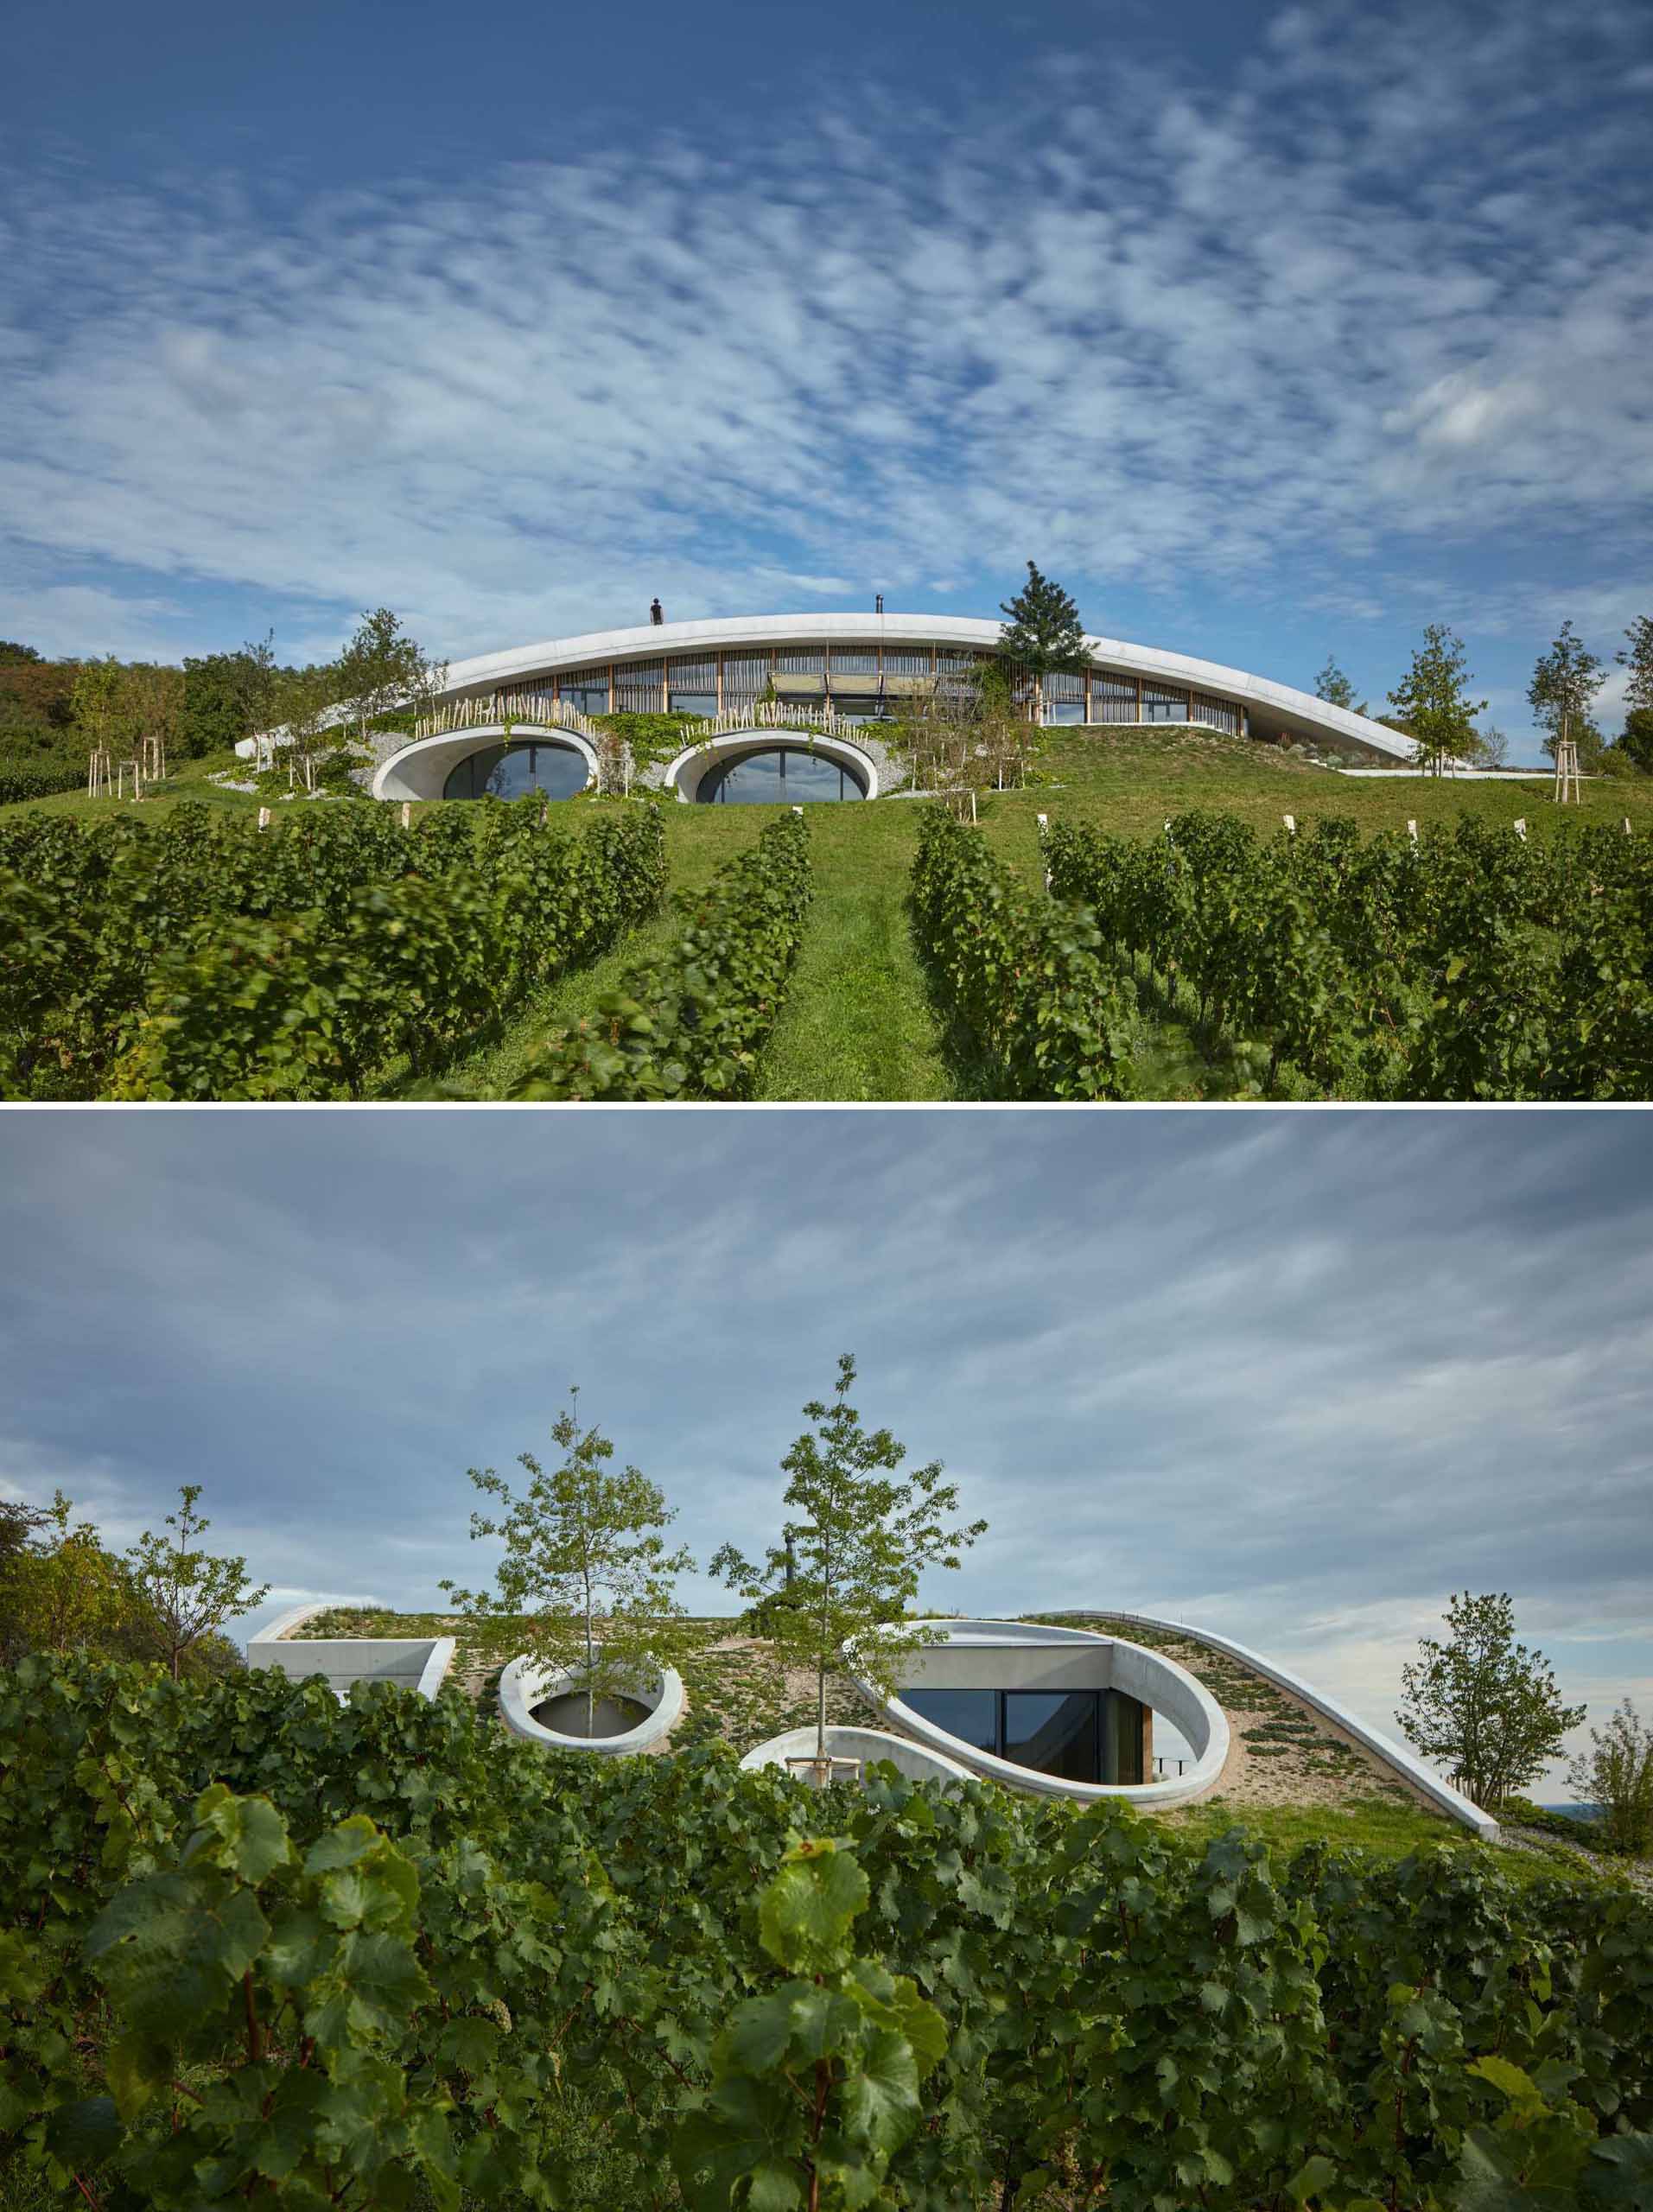 A modern winery that's built with a curved green roof to allow it to blend in with the landscape.